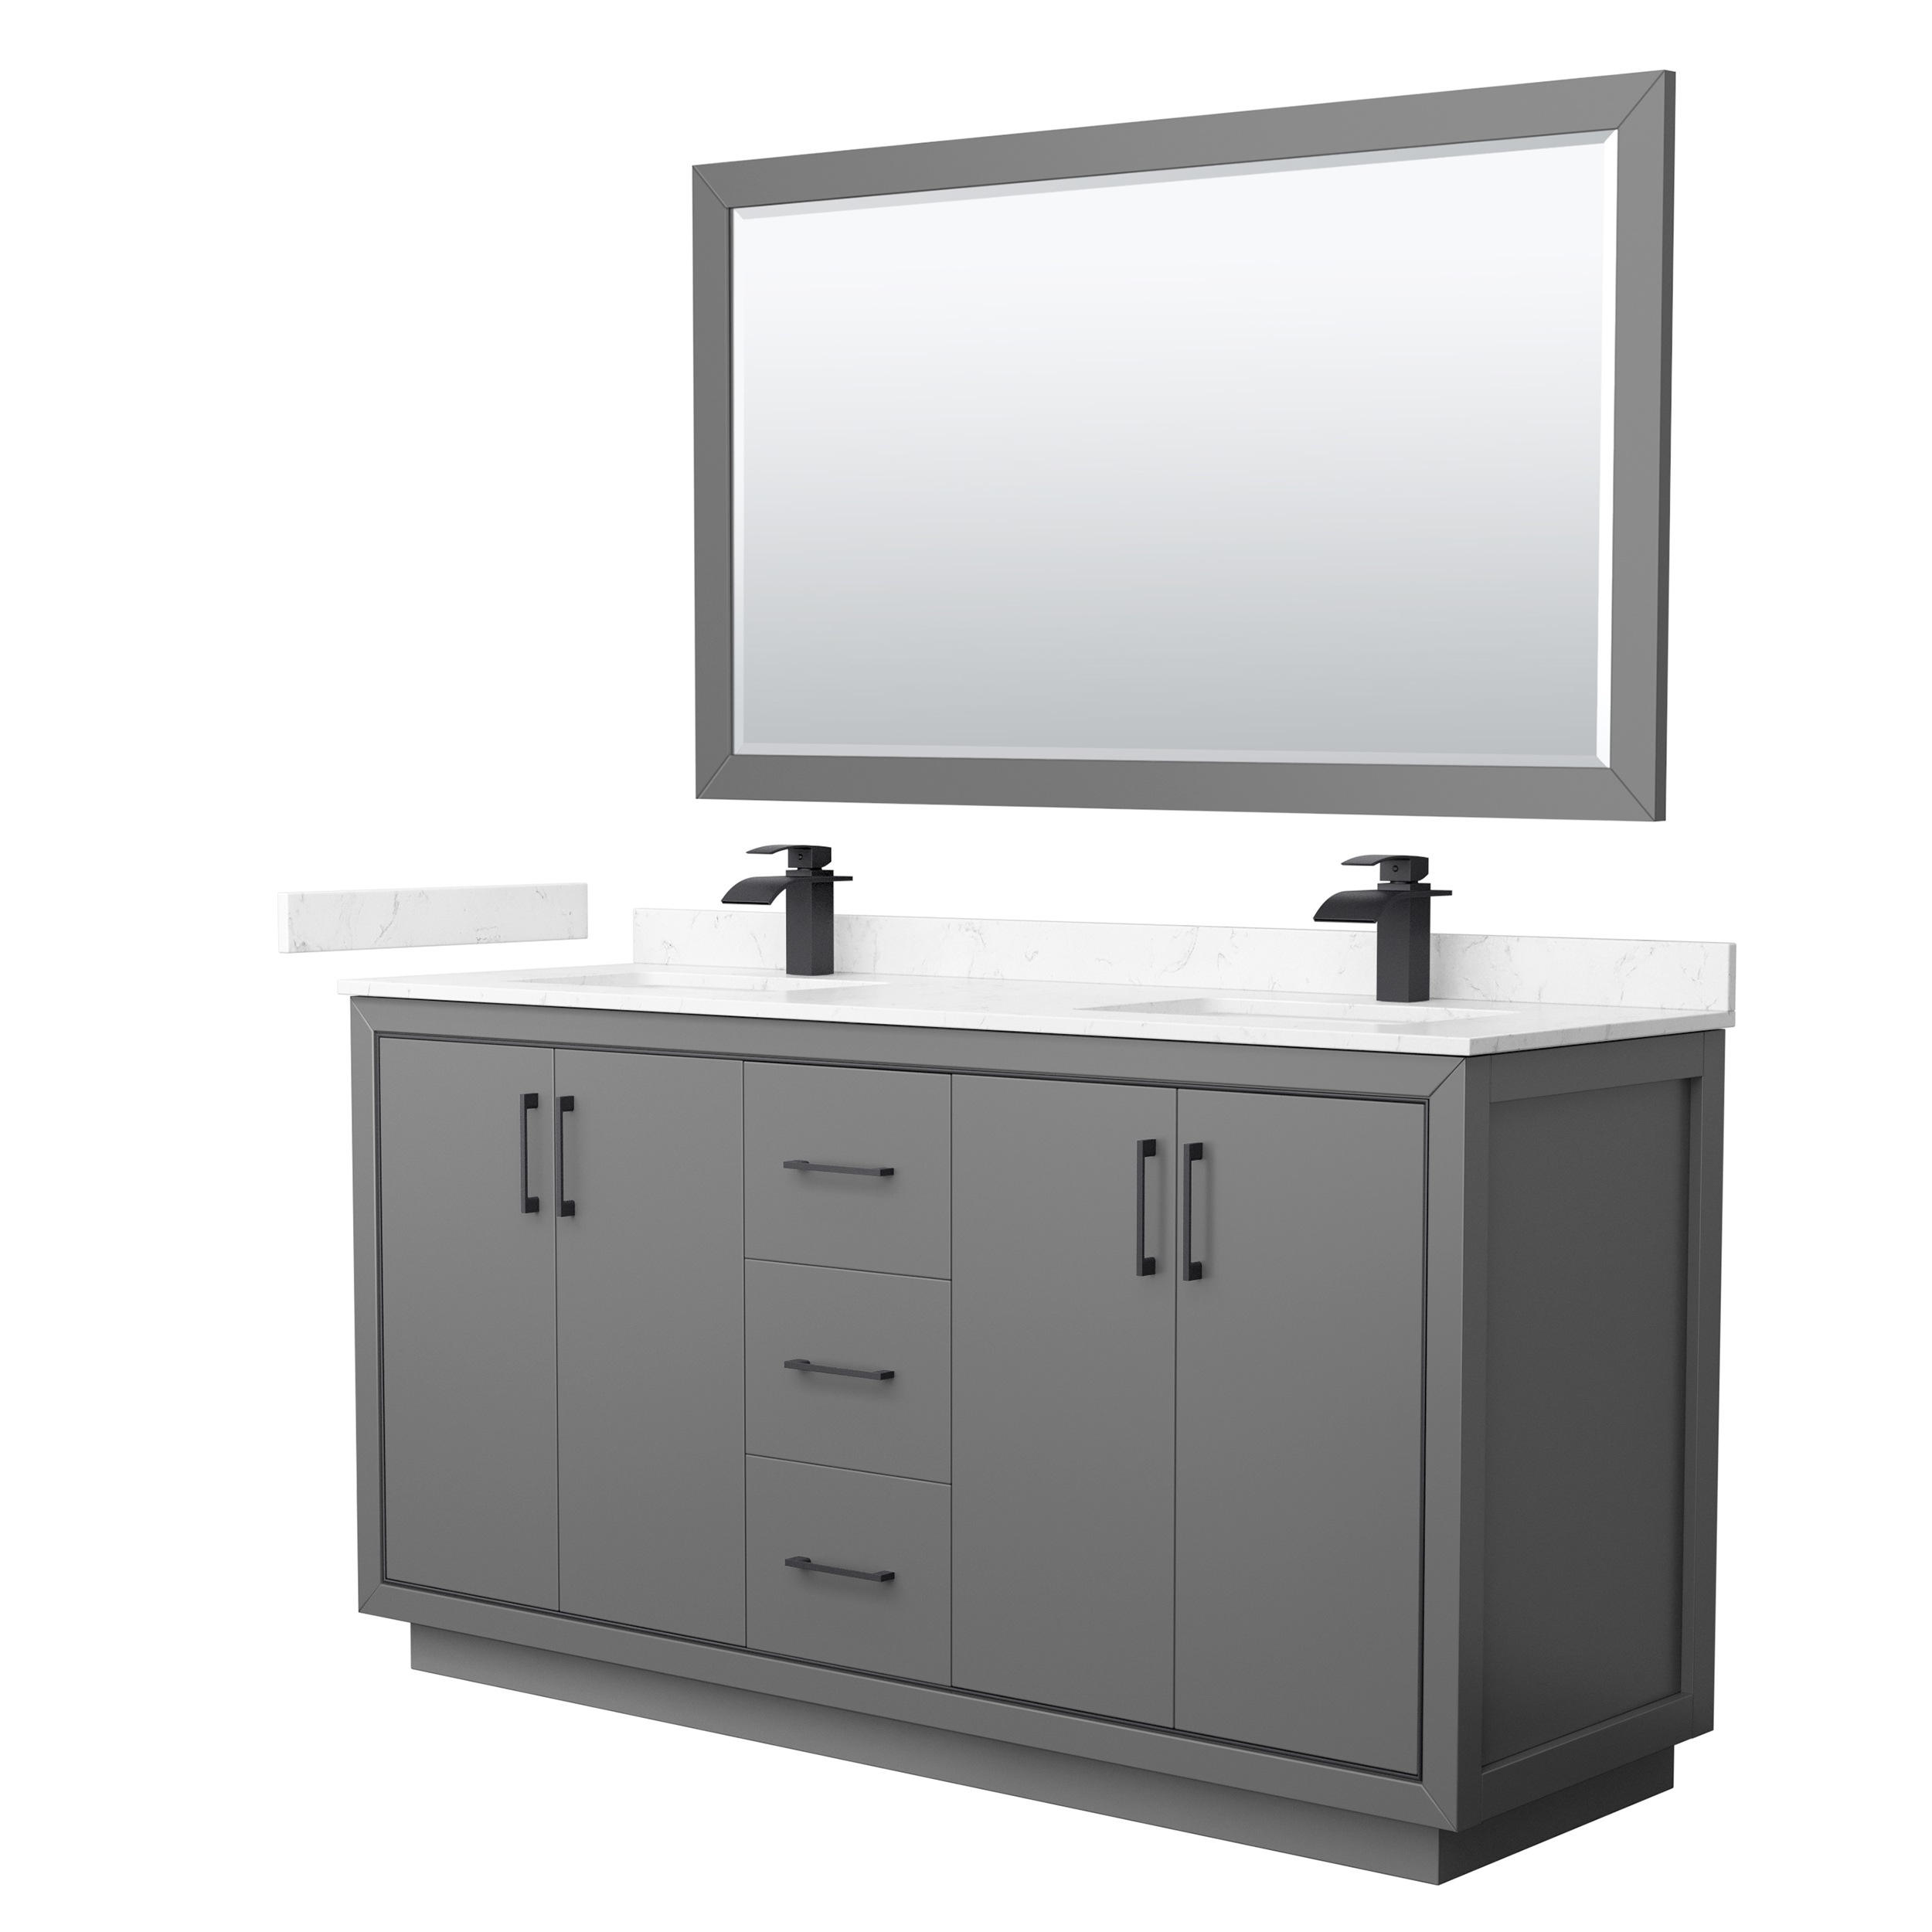 Icon 66" Double Vanity with optional Cultured Marble Counter - Dark Blue WC-1111-66-DBL-VAN-BLU-